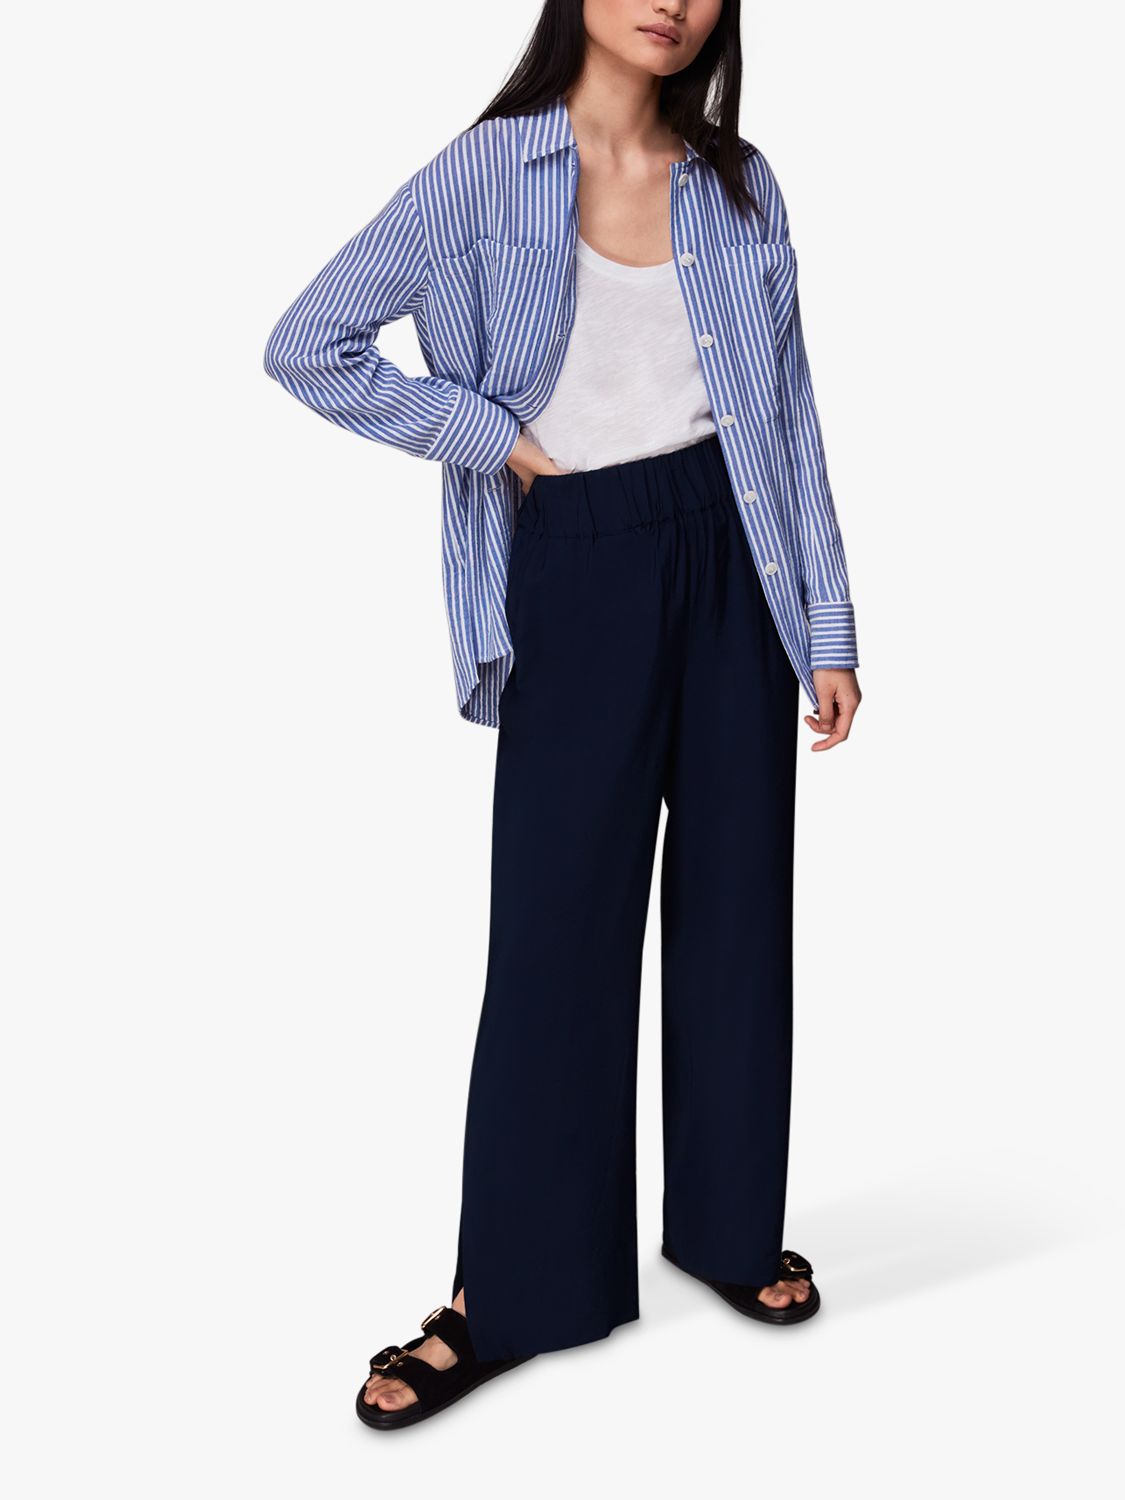 Whistles Nicola Elasticated Trousers, Navy at John Lewis & Partners